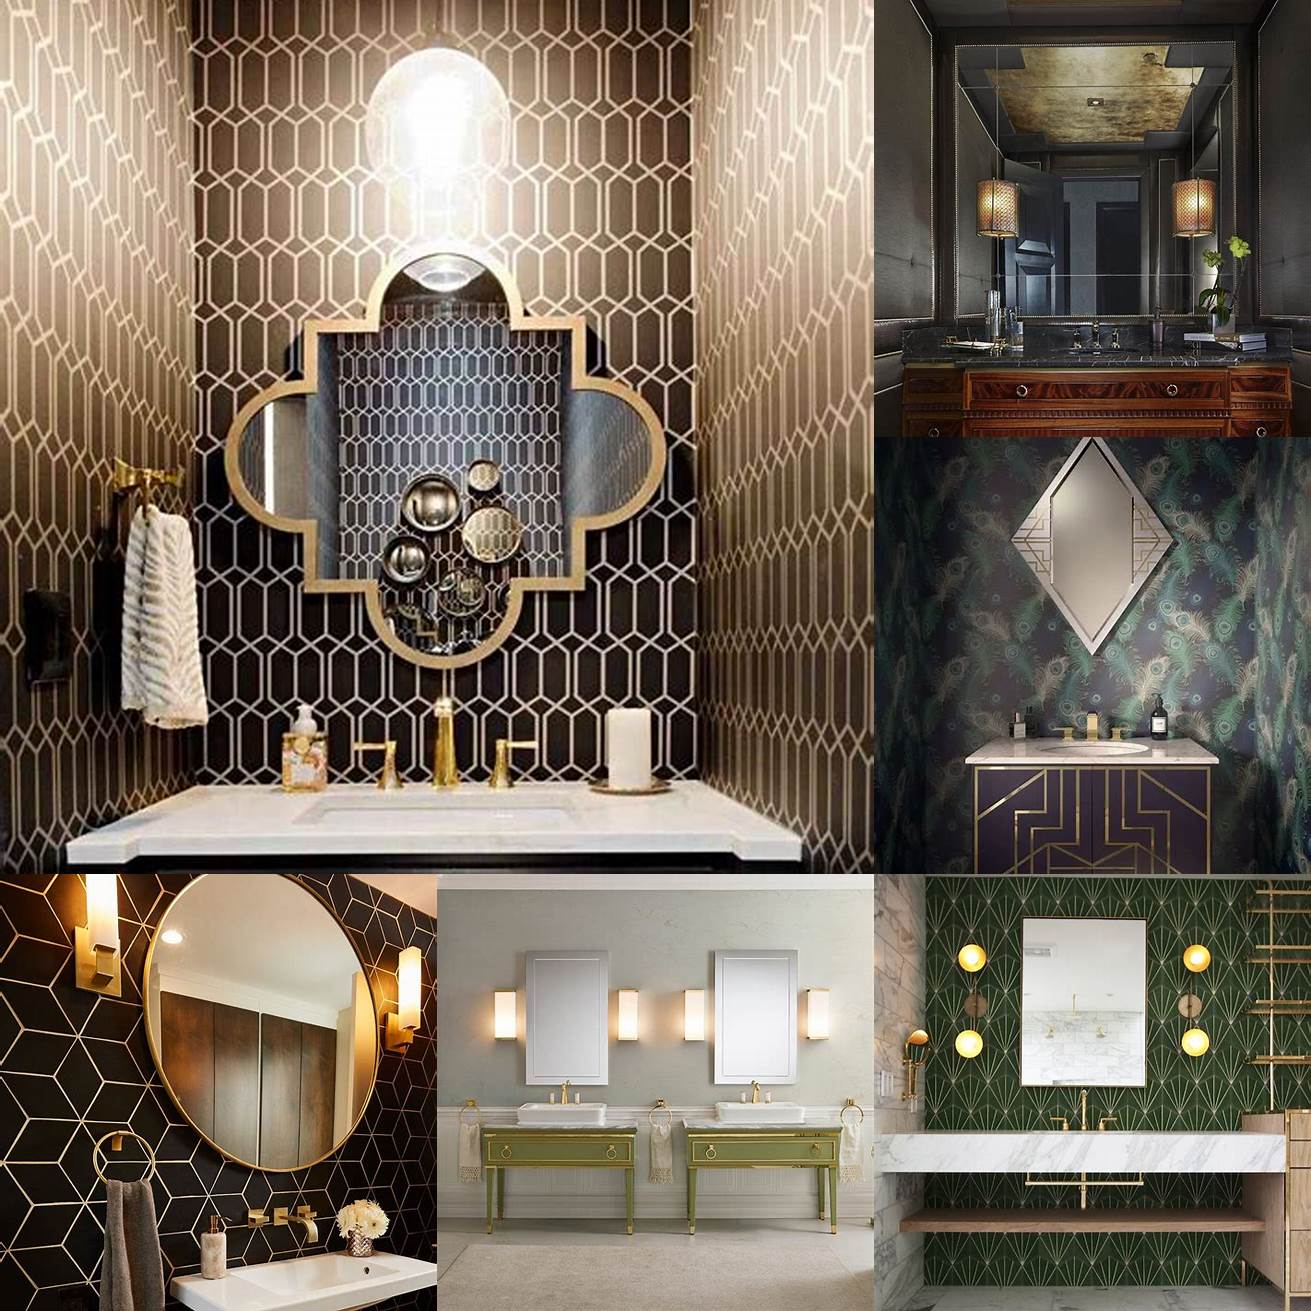 An Art Deco vanity with a geometric design and bold colors